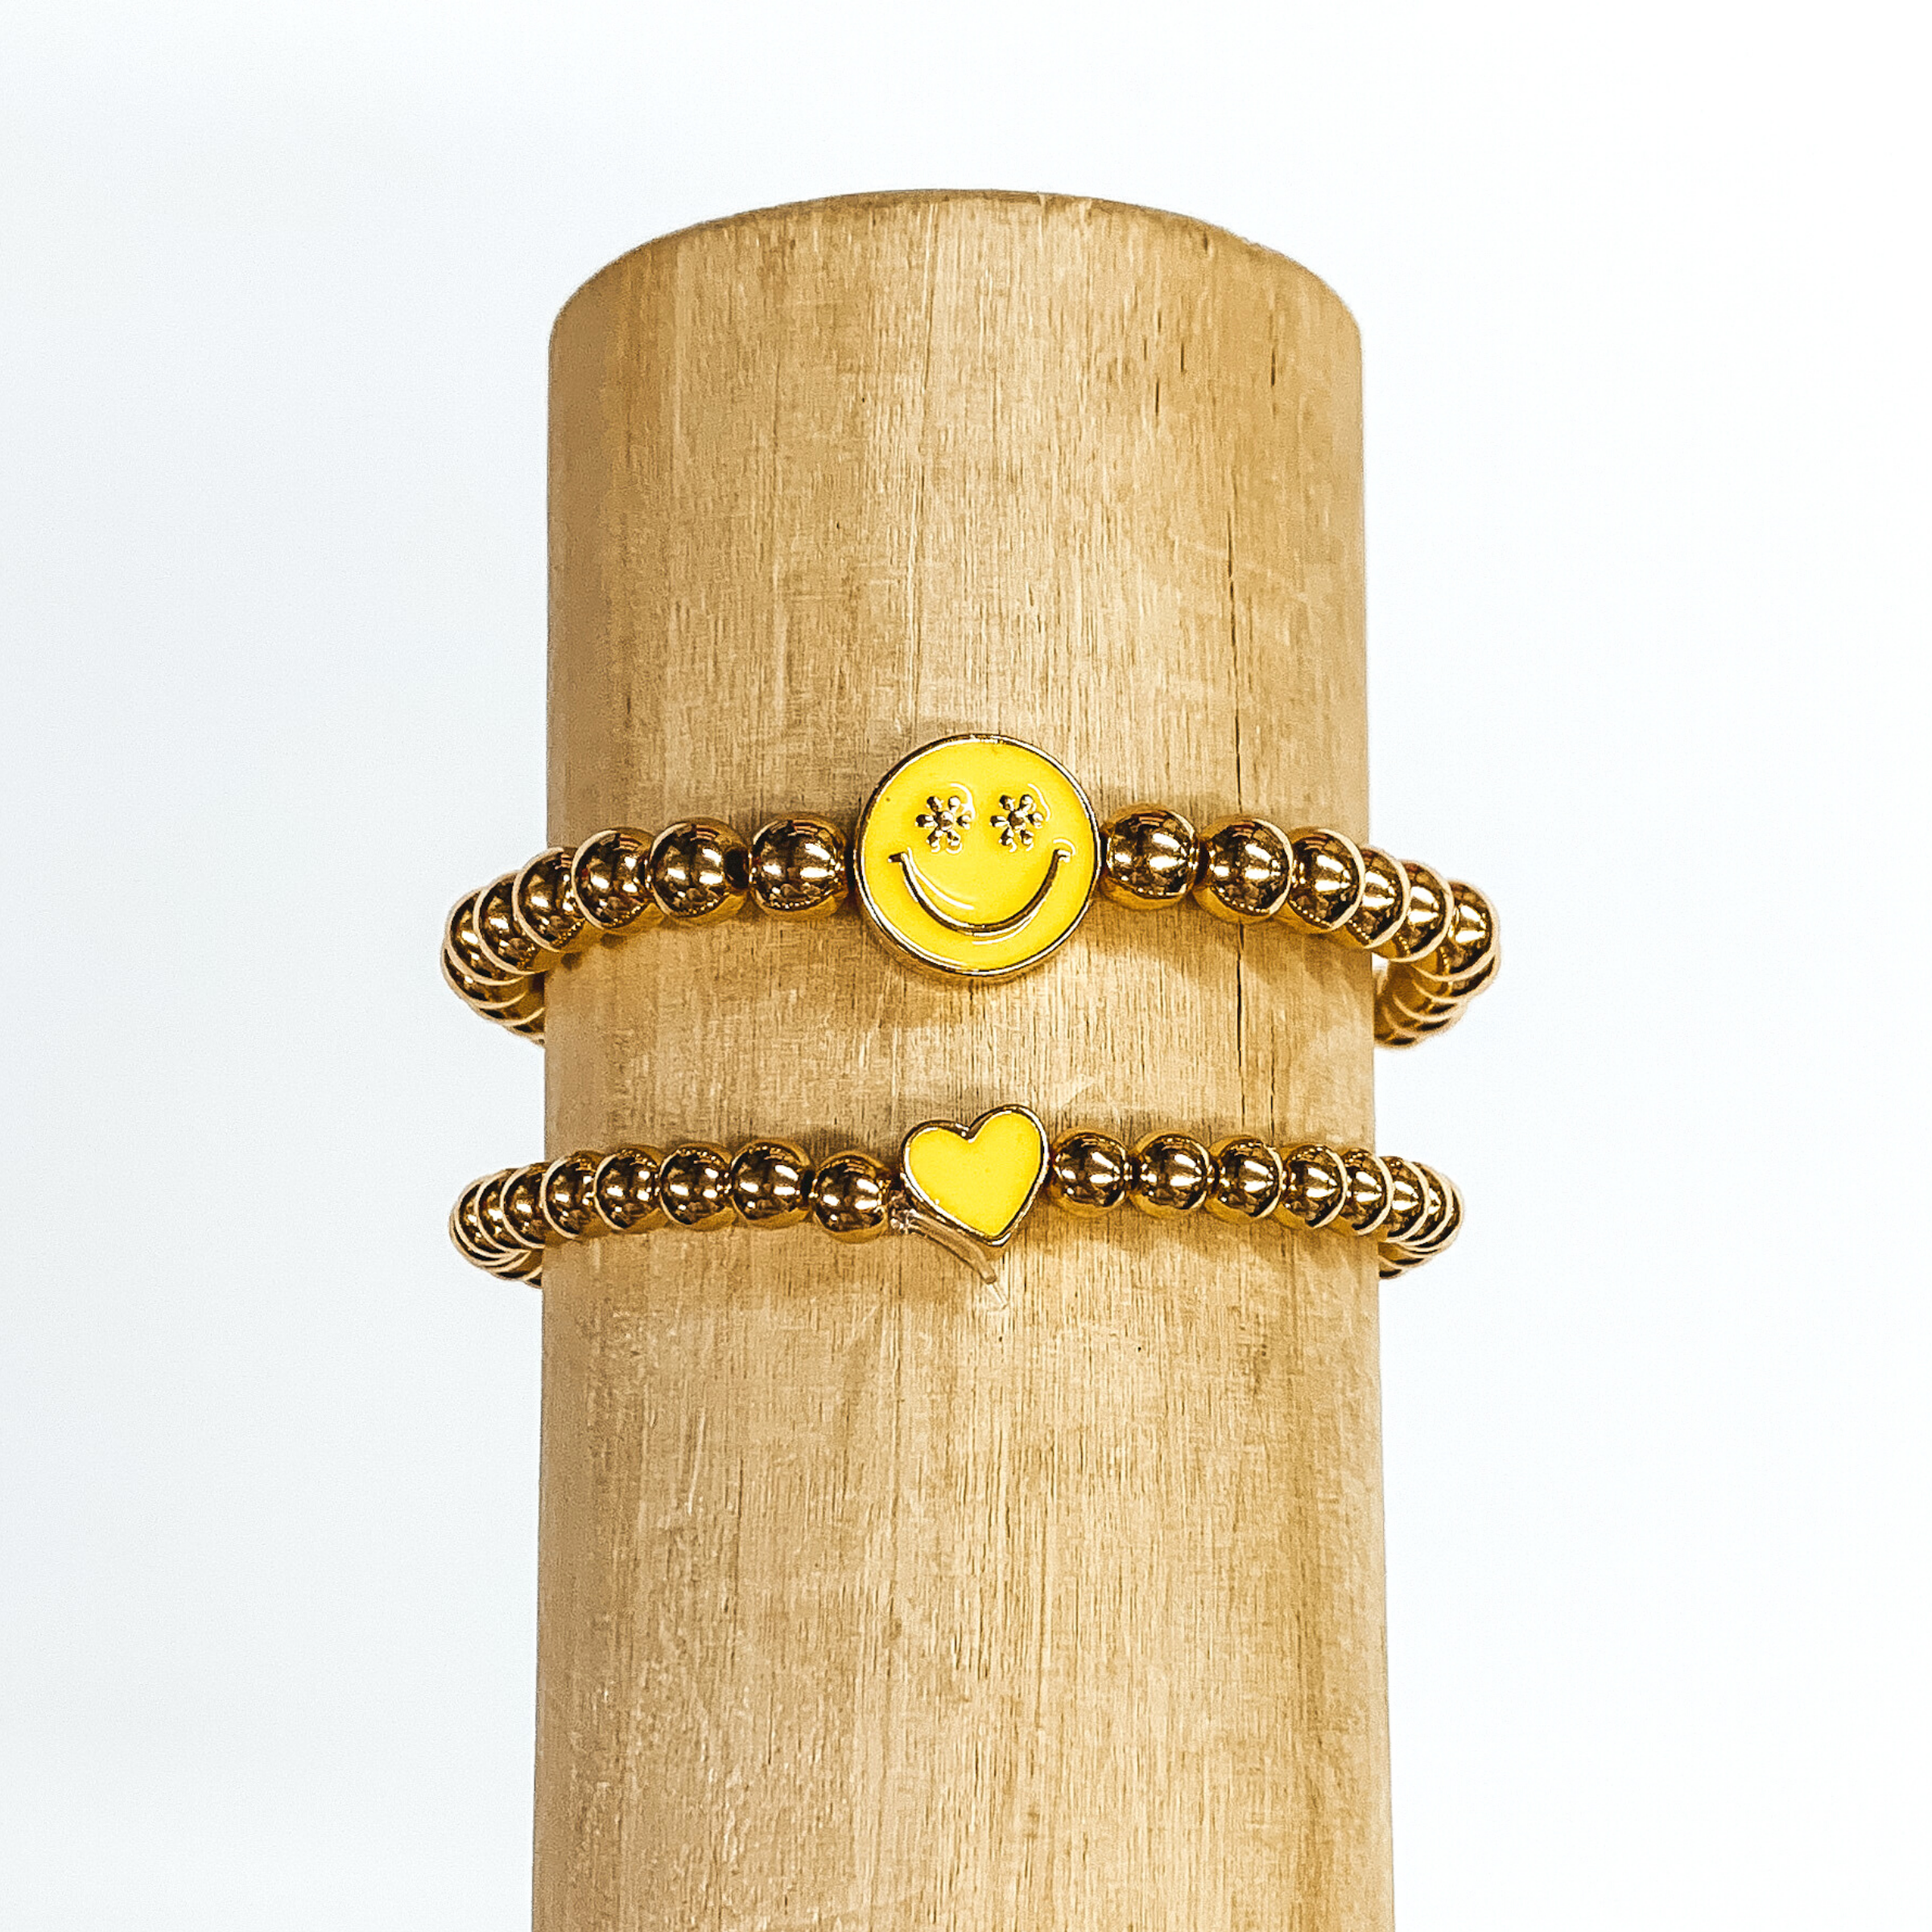 Two gold beaded bracelets. One bracelet has a tiny heart charm colored yellow. The other bracelet has a circle charm that is colored yellow with a smiley face in gold in the center. The eyes of the smiley face are tiny flowers. These two bracelets are pictured on a wood bracelet holder on a white background. 